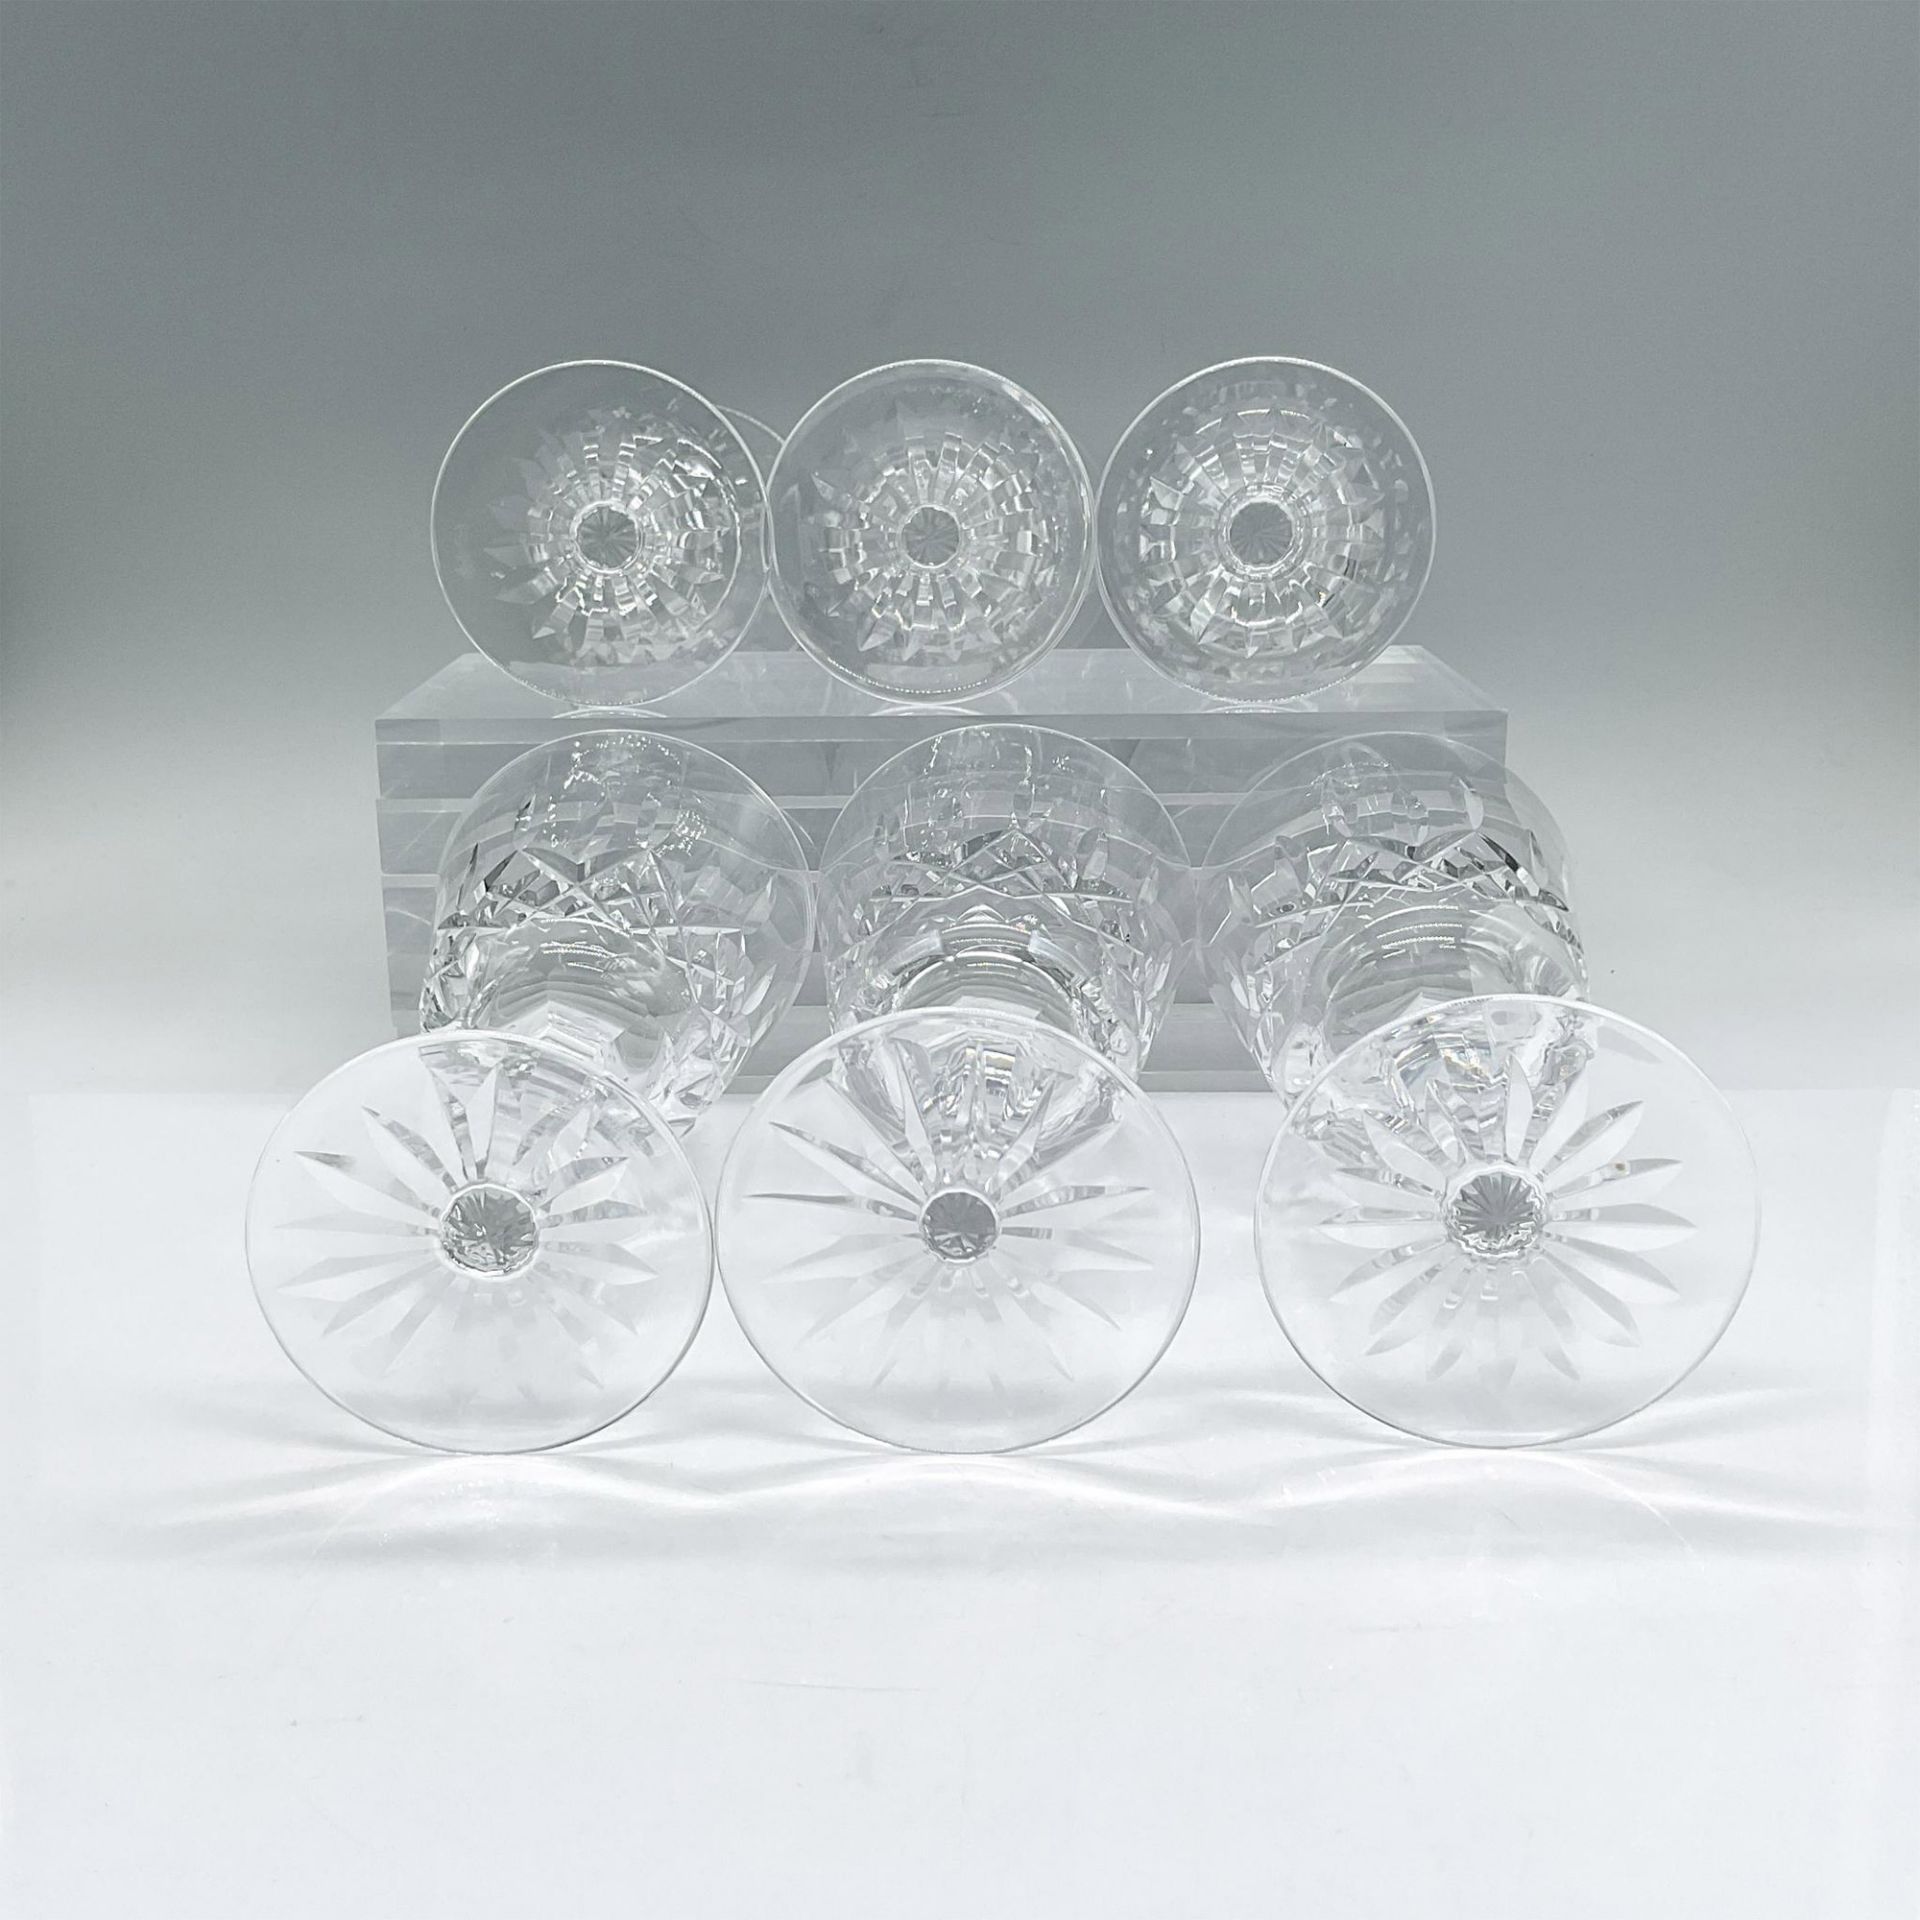 6pc Waterford Crystal Water Goblet Glasses, Lismore - Image 3 of 3